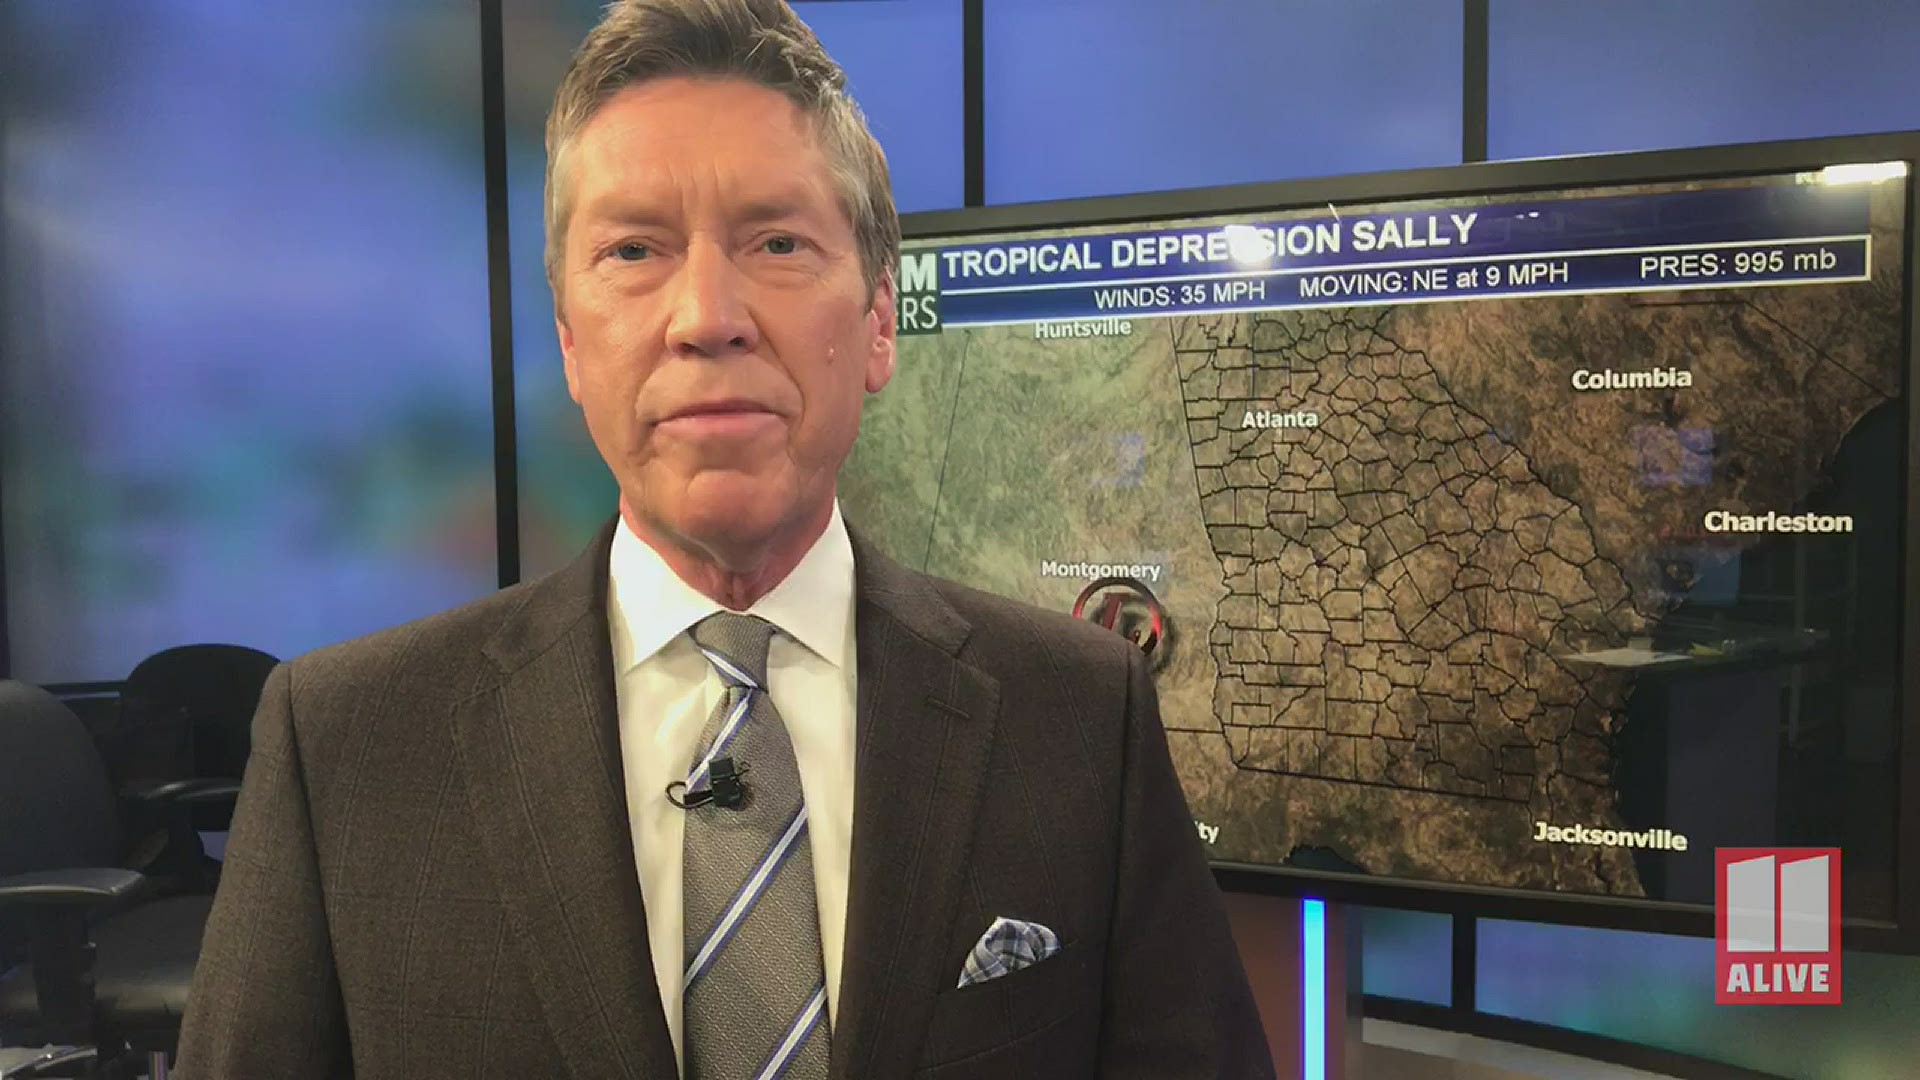 Sally is now a tropical depression. Here is the latest information about the storm.